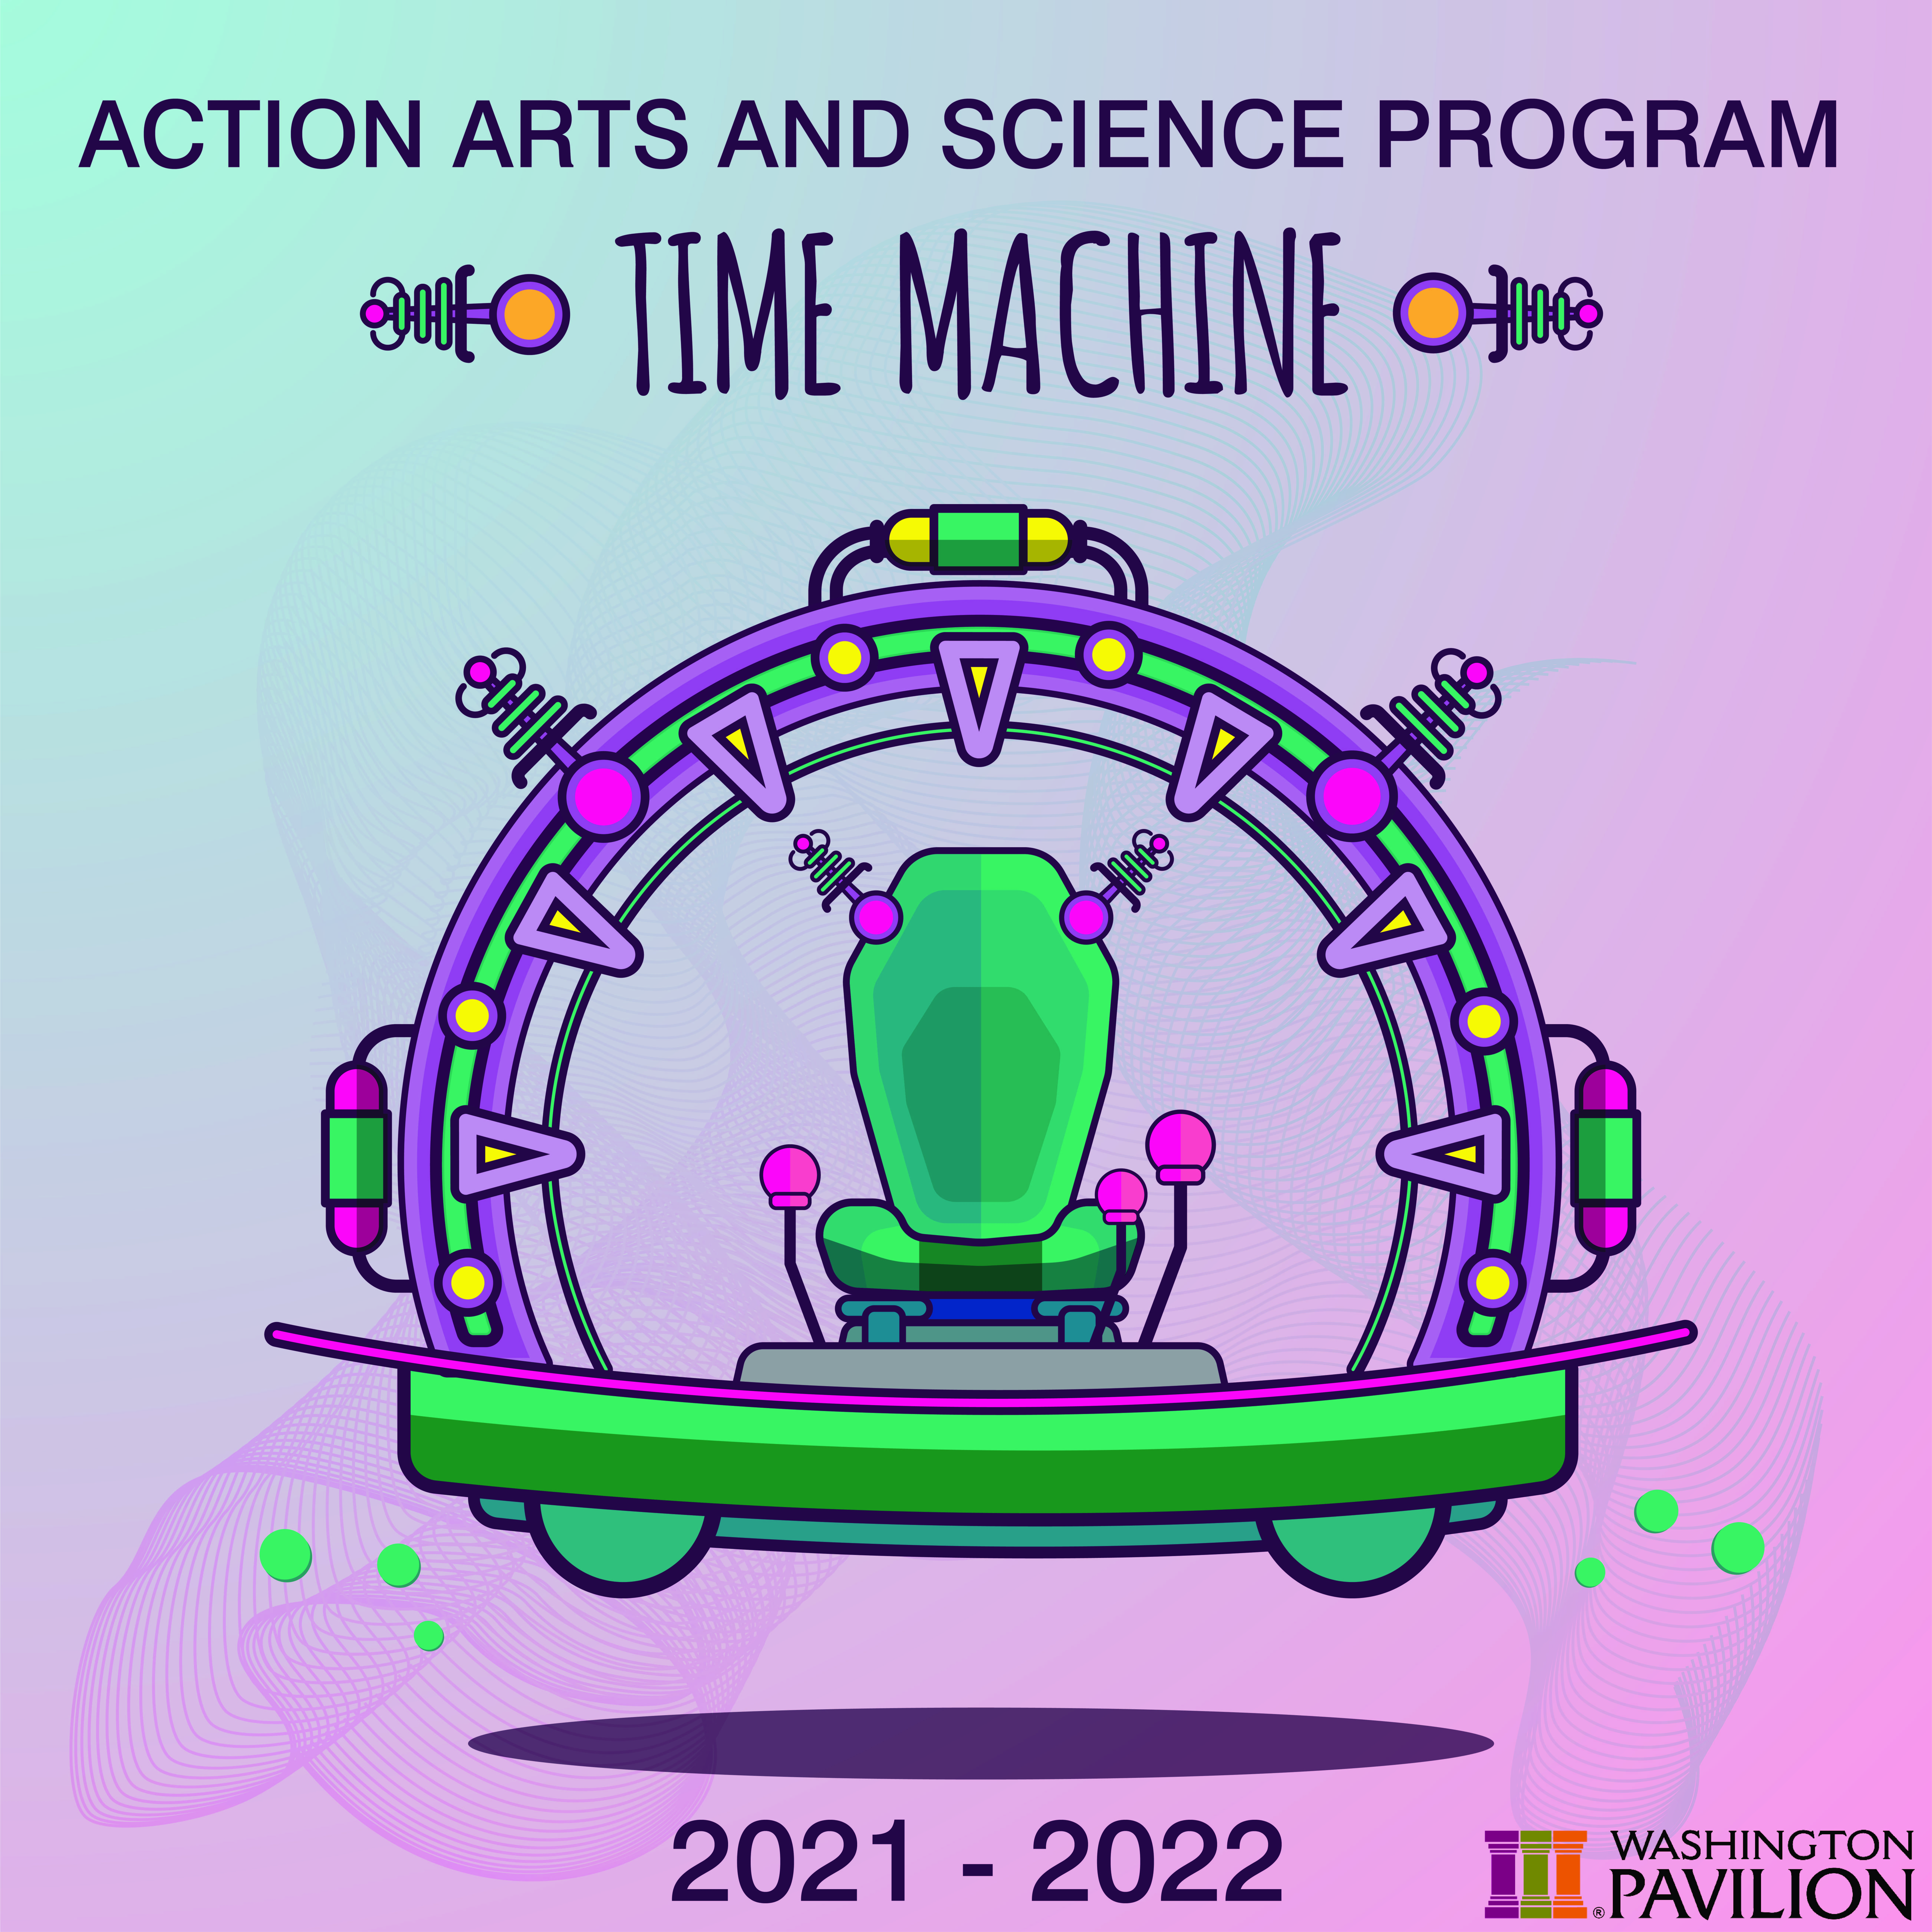 Action Arts and Science Program